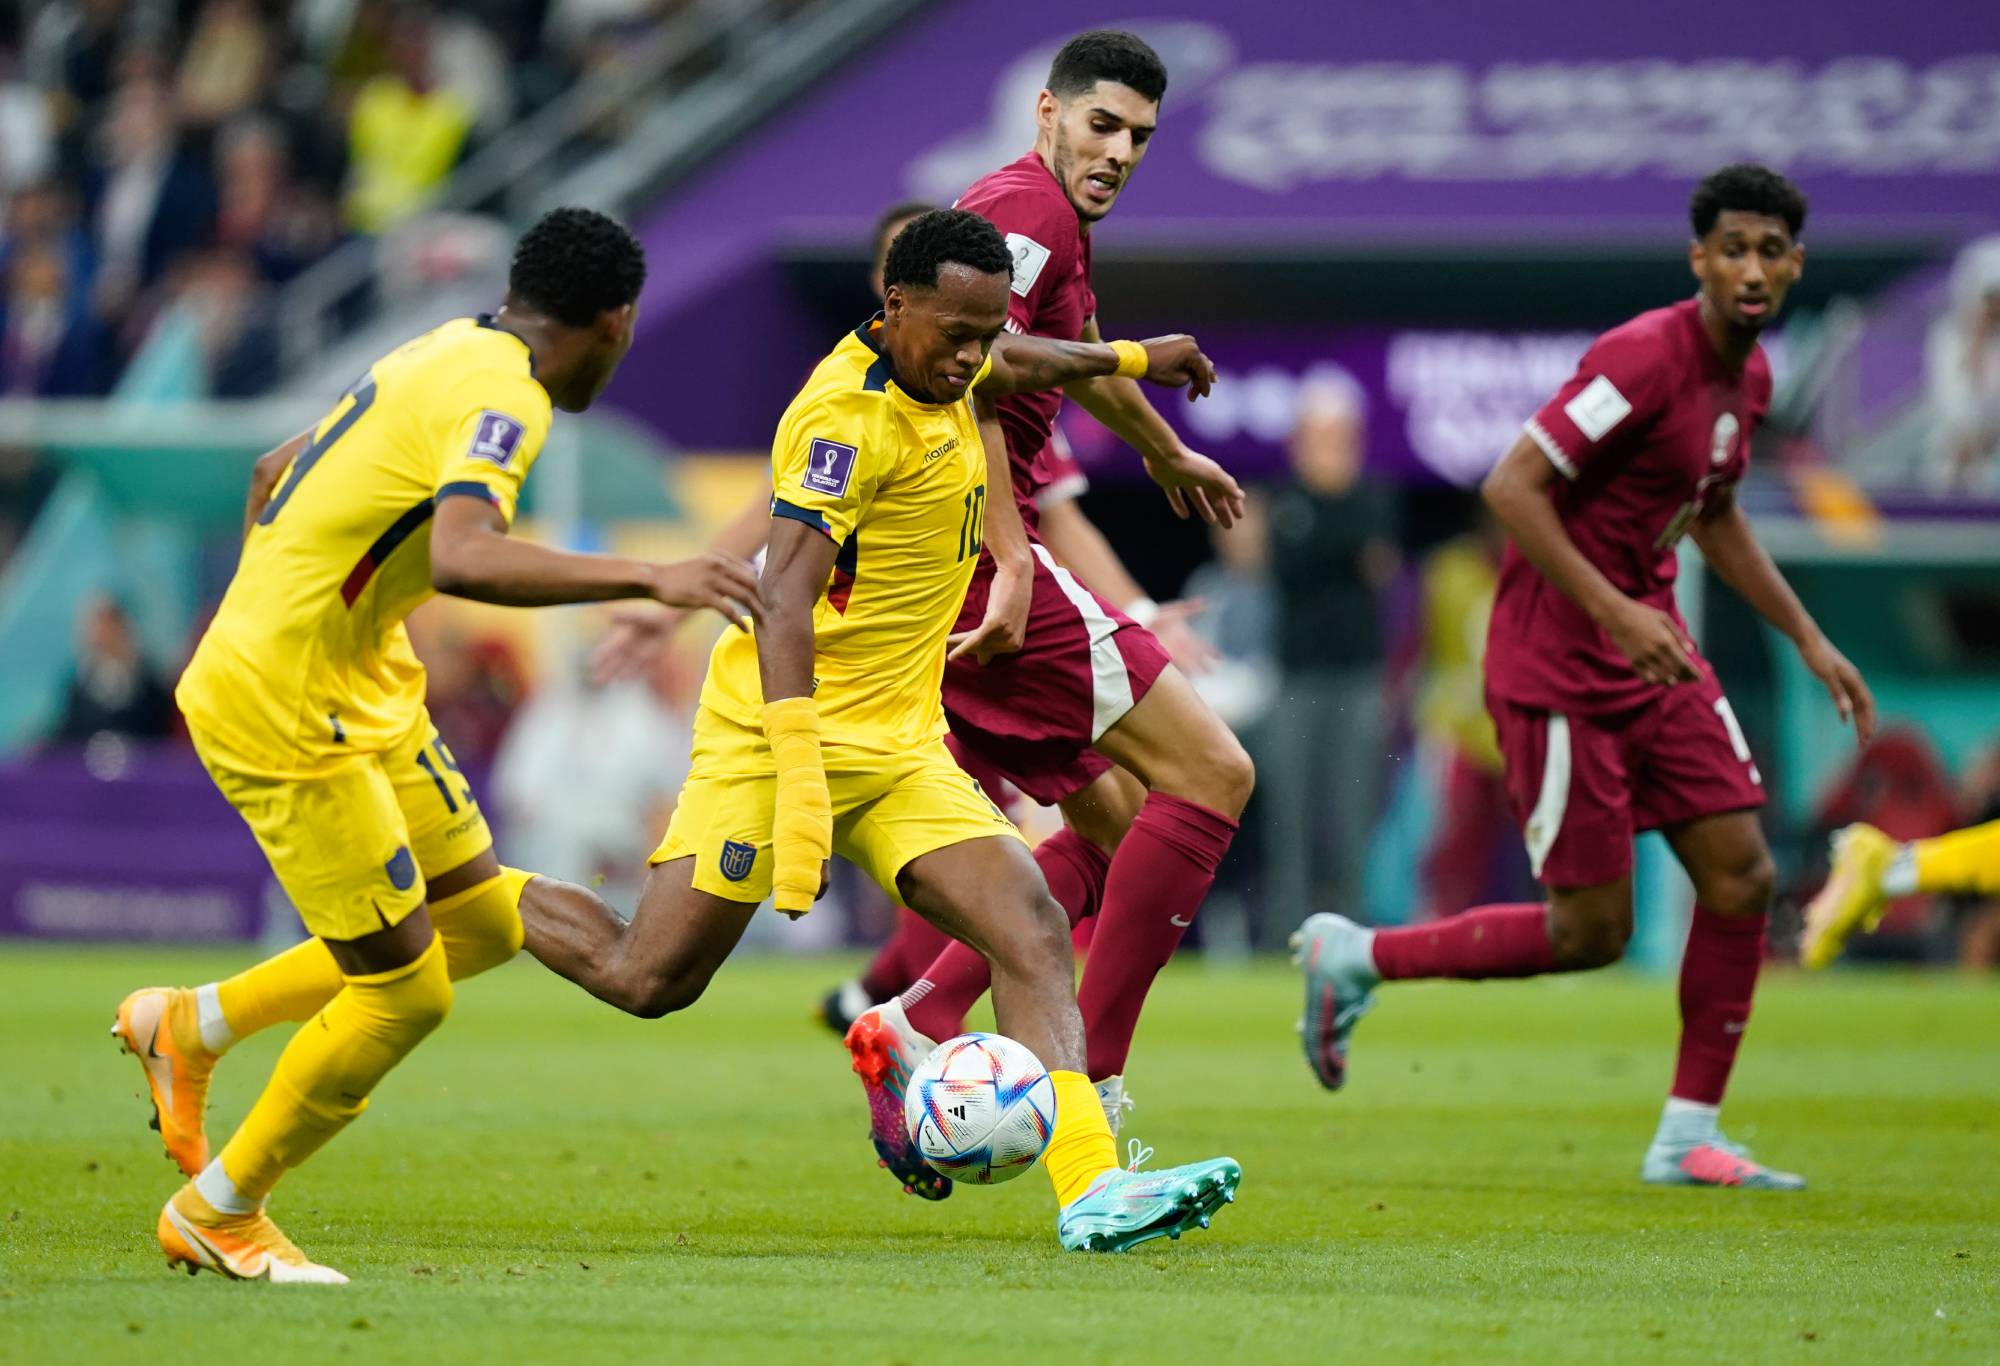 Ecuador midfielder Romario Ibarra (10) takes the ball down field against Qatar during the opening match of the FIFA World Cup 2022 at Al Bayt Stadium in Doha, Qatar on November 20, 2022. (Photo by Jabin Botsford/The Washington Post via Getty Images)